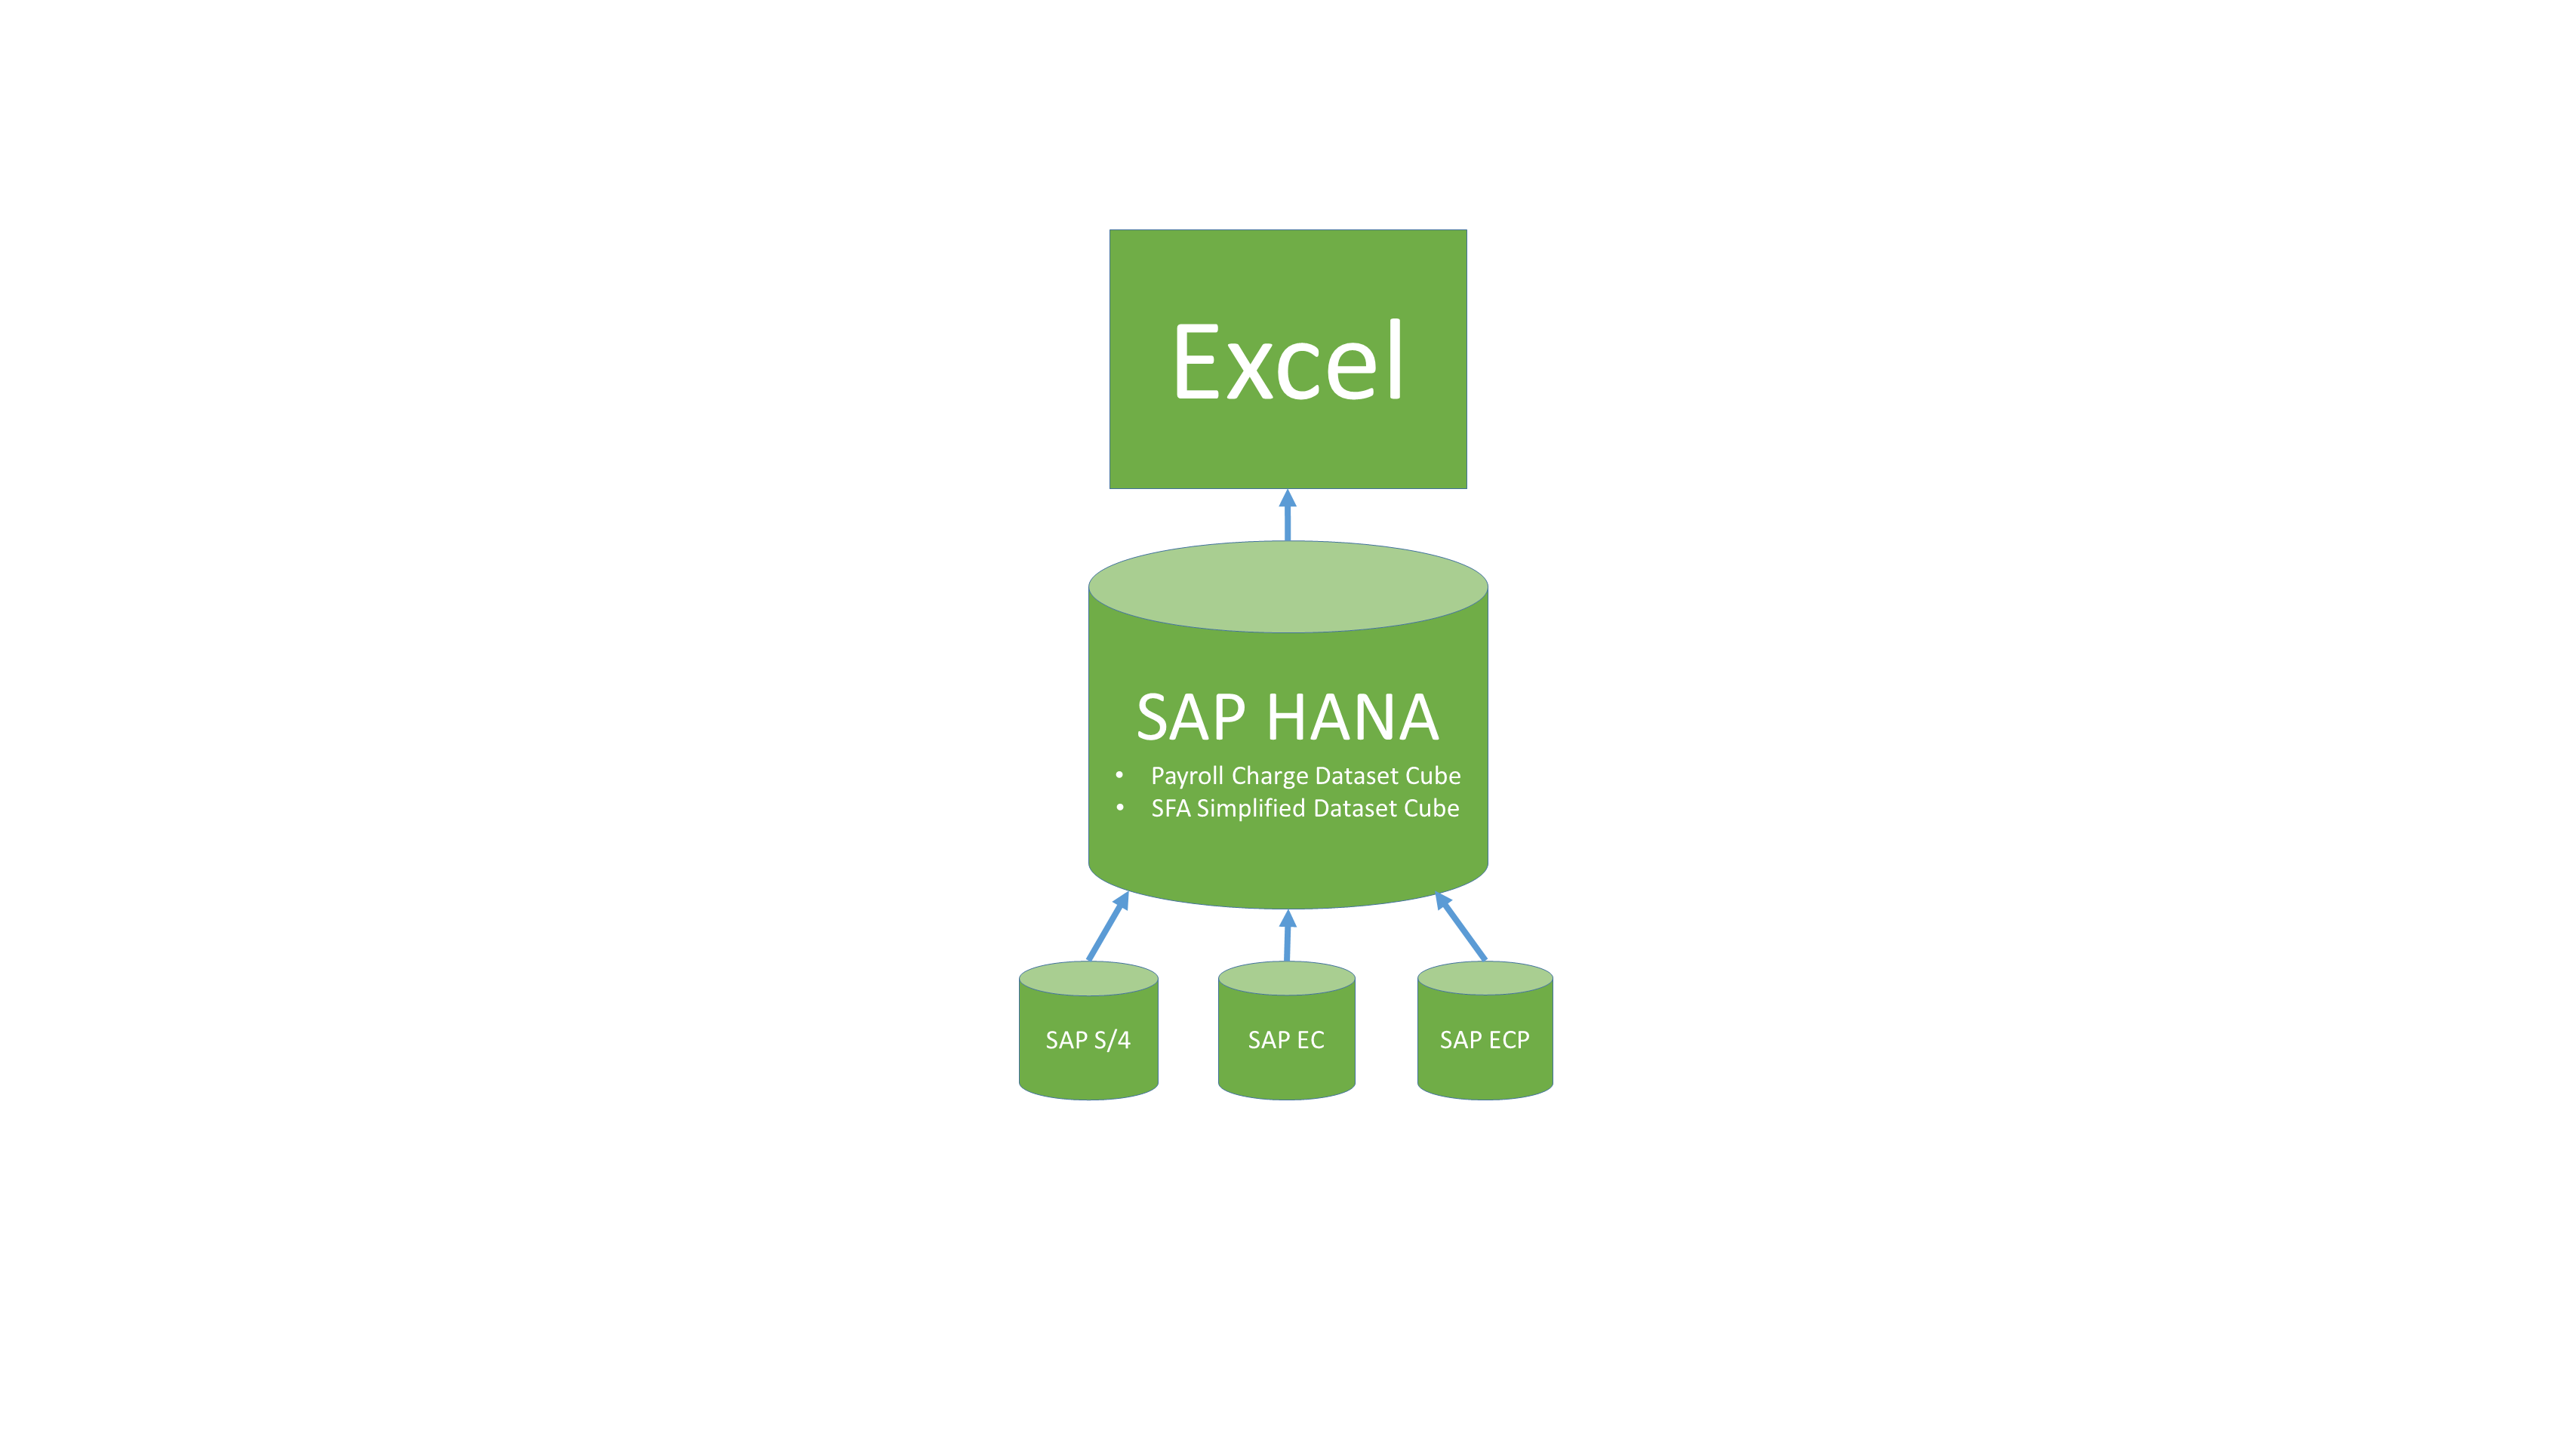 I image showing the relationship between Excel and the Data it connects to in HANA